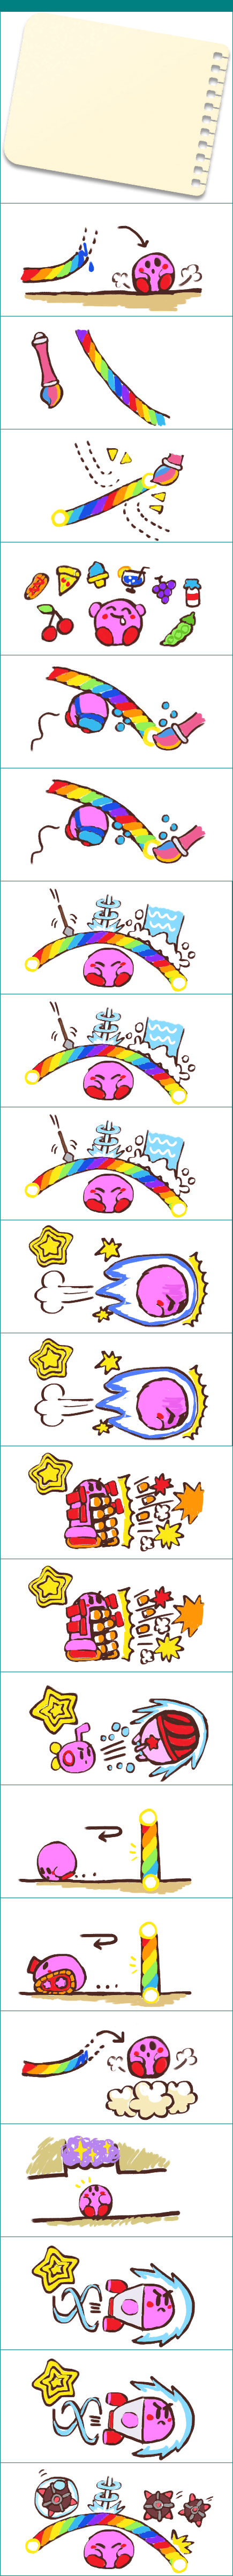 Kirby and the Rainbow Curse / Paintbrush - Help Images